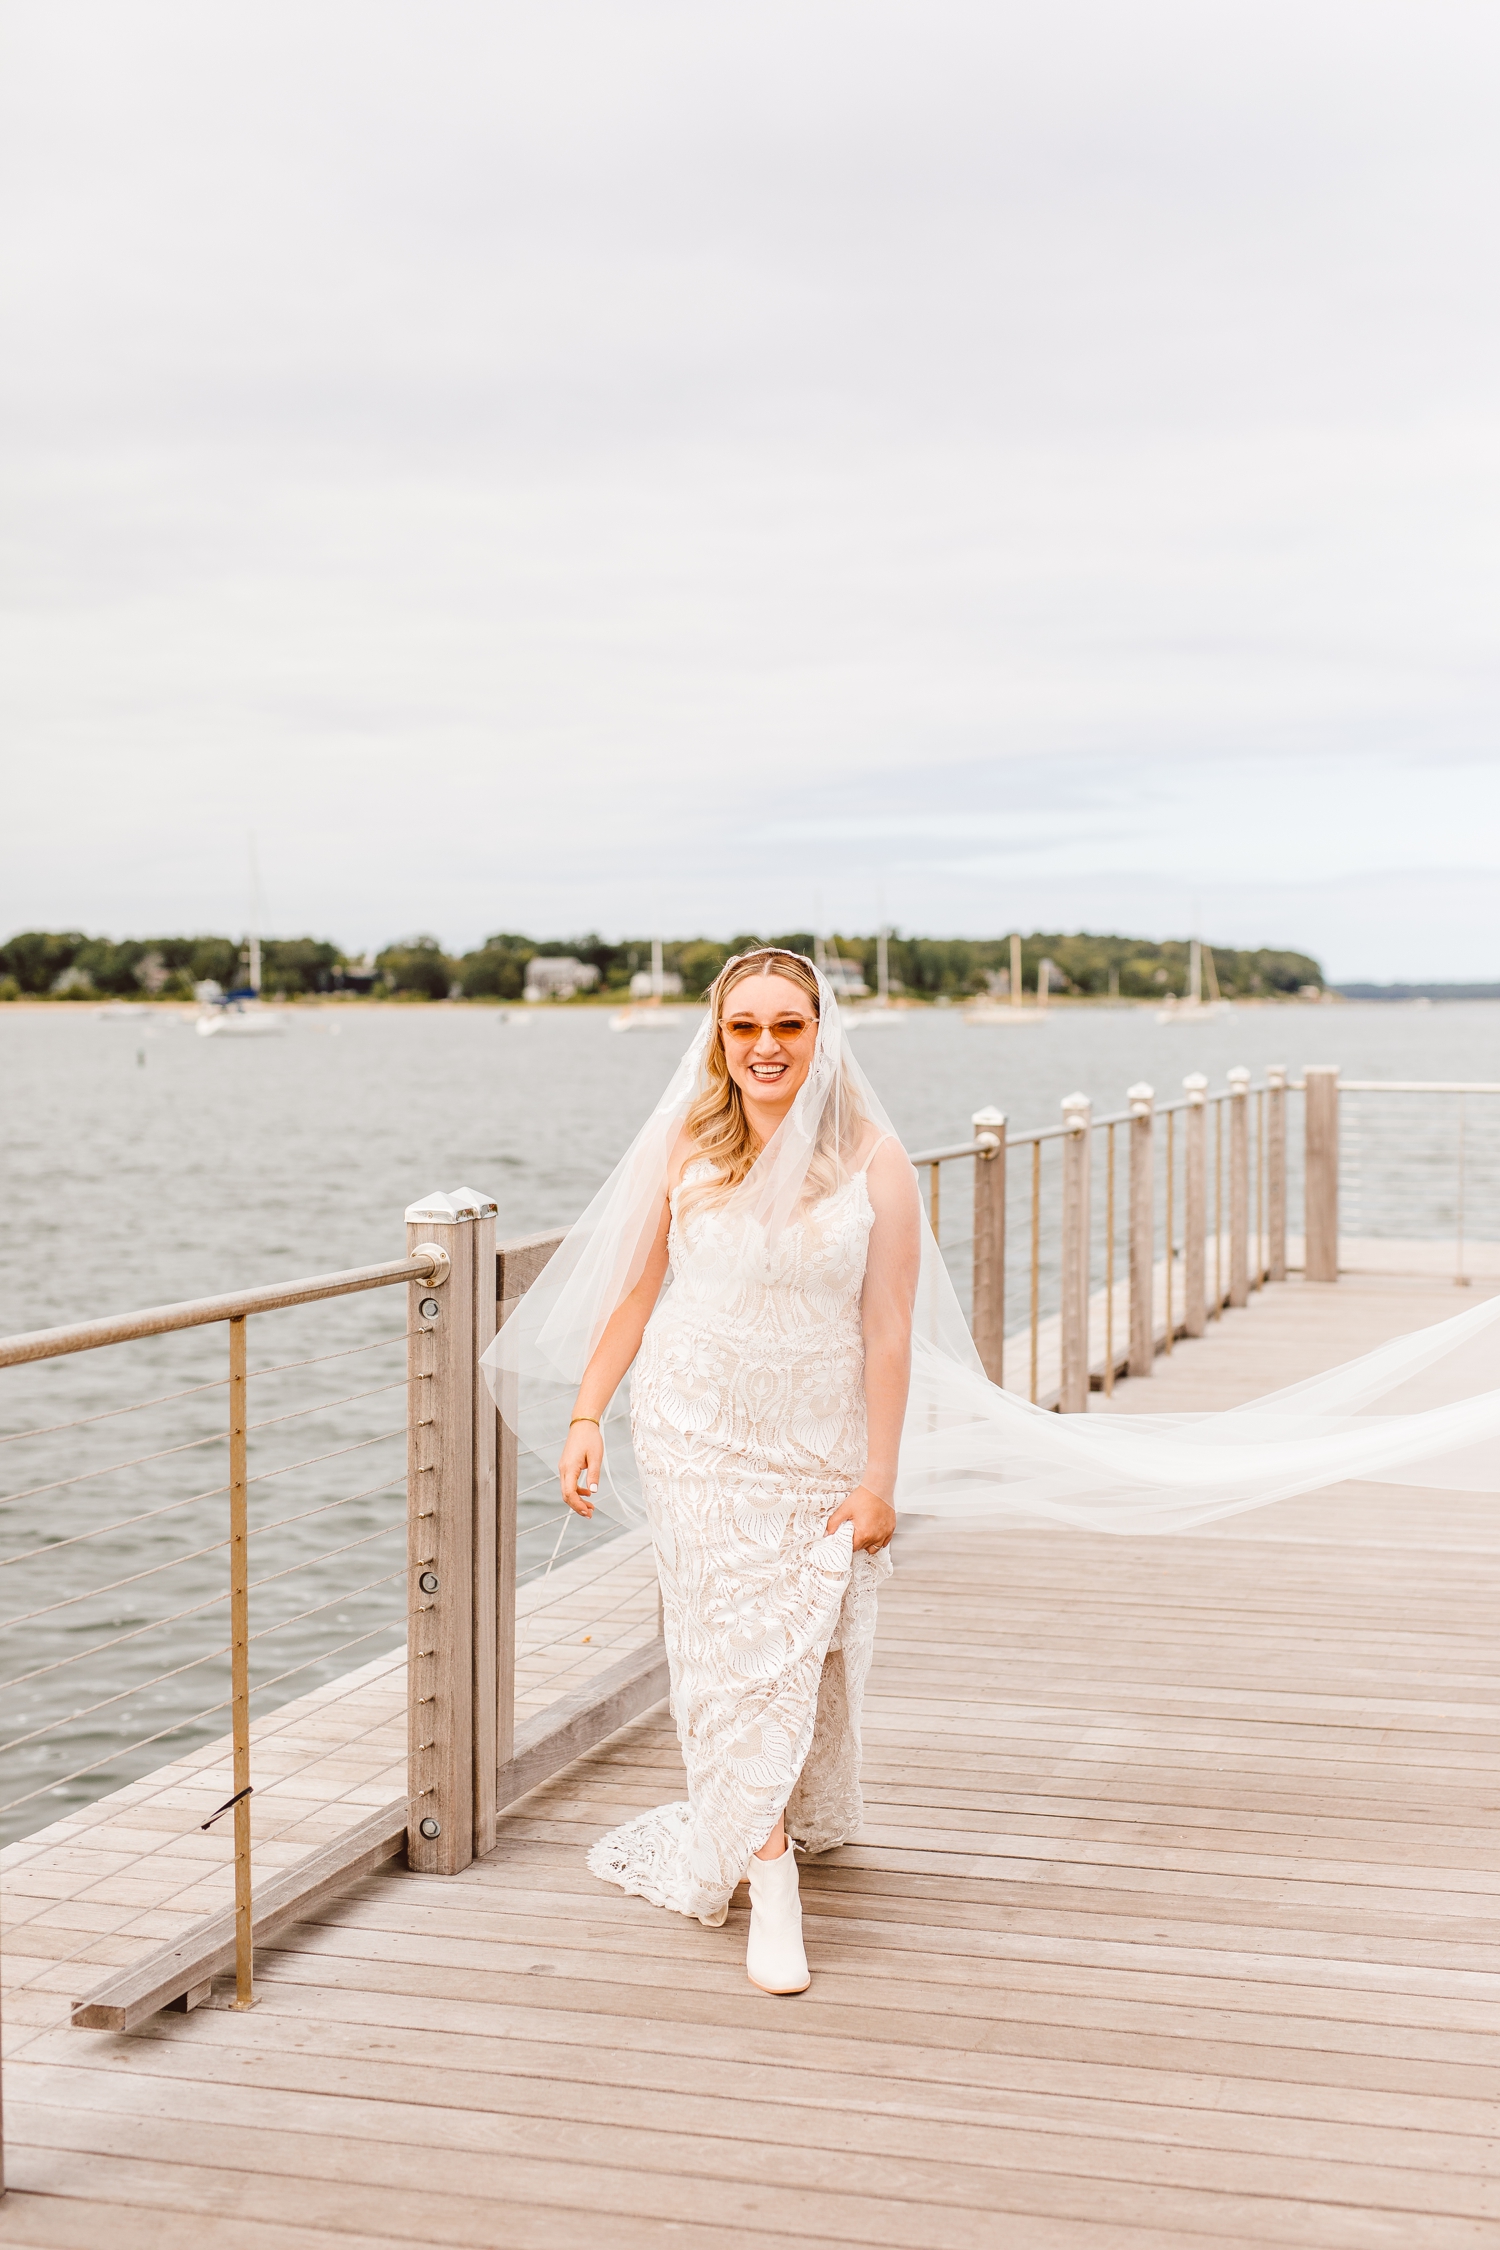 Bride wearing cat eye sunglasses and walking on pier | Brooke Michelle Photography